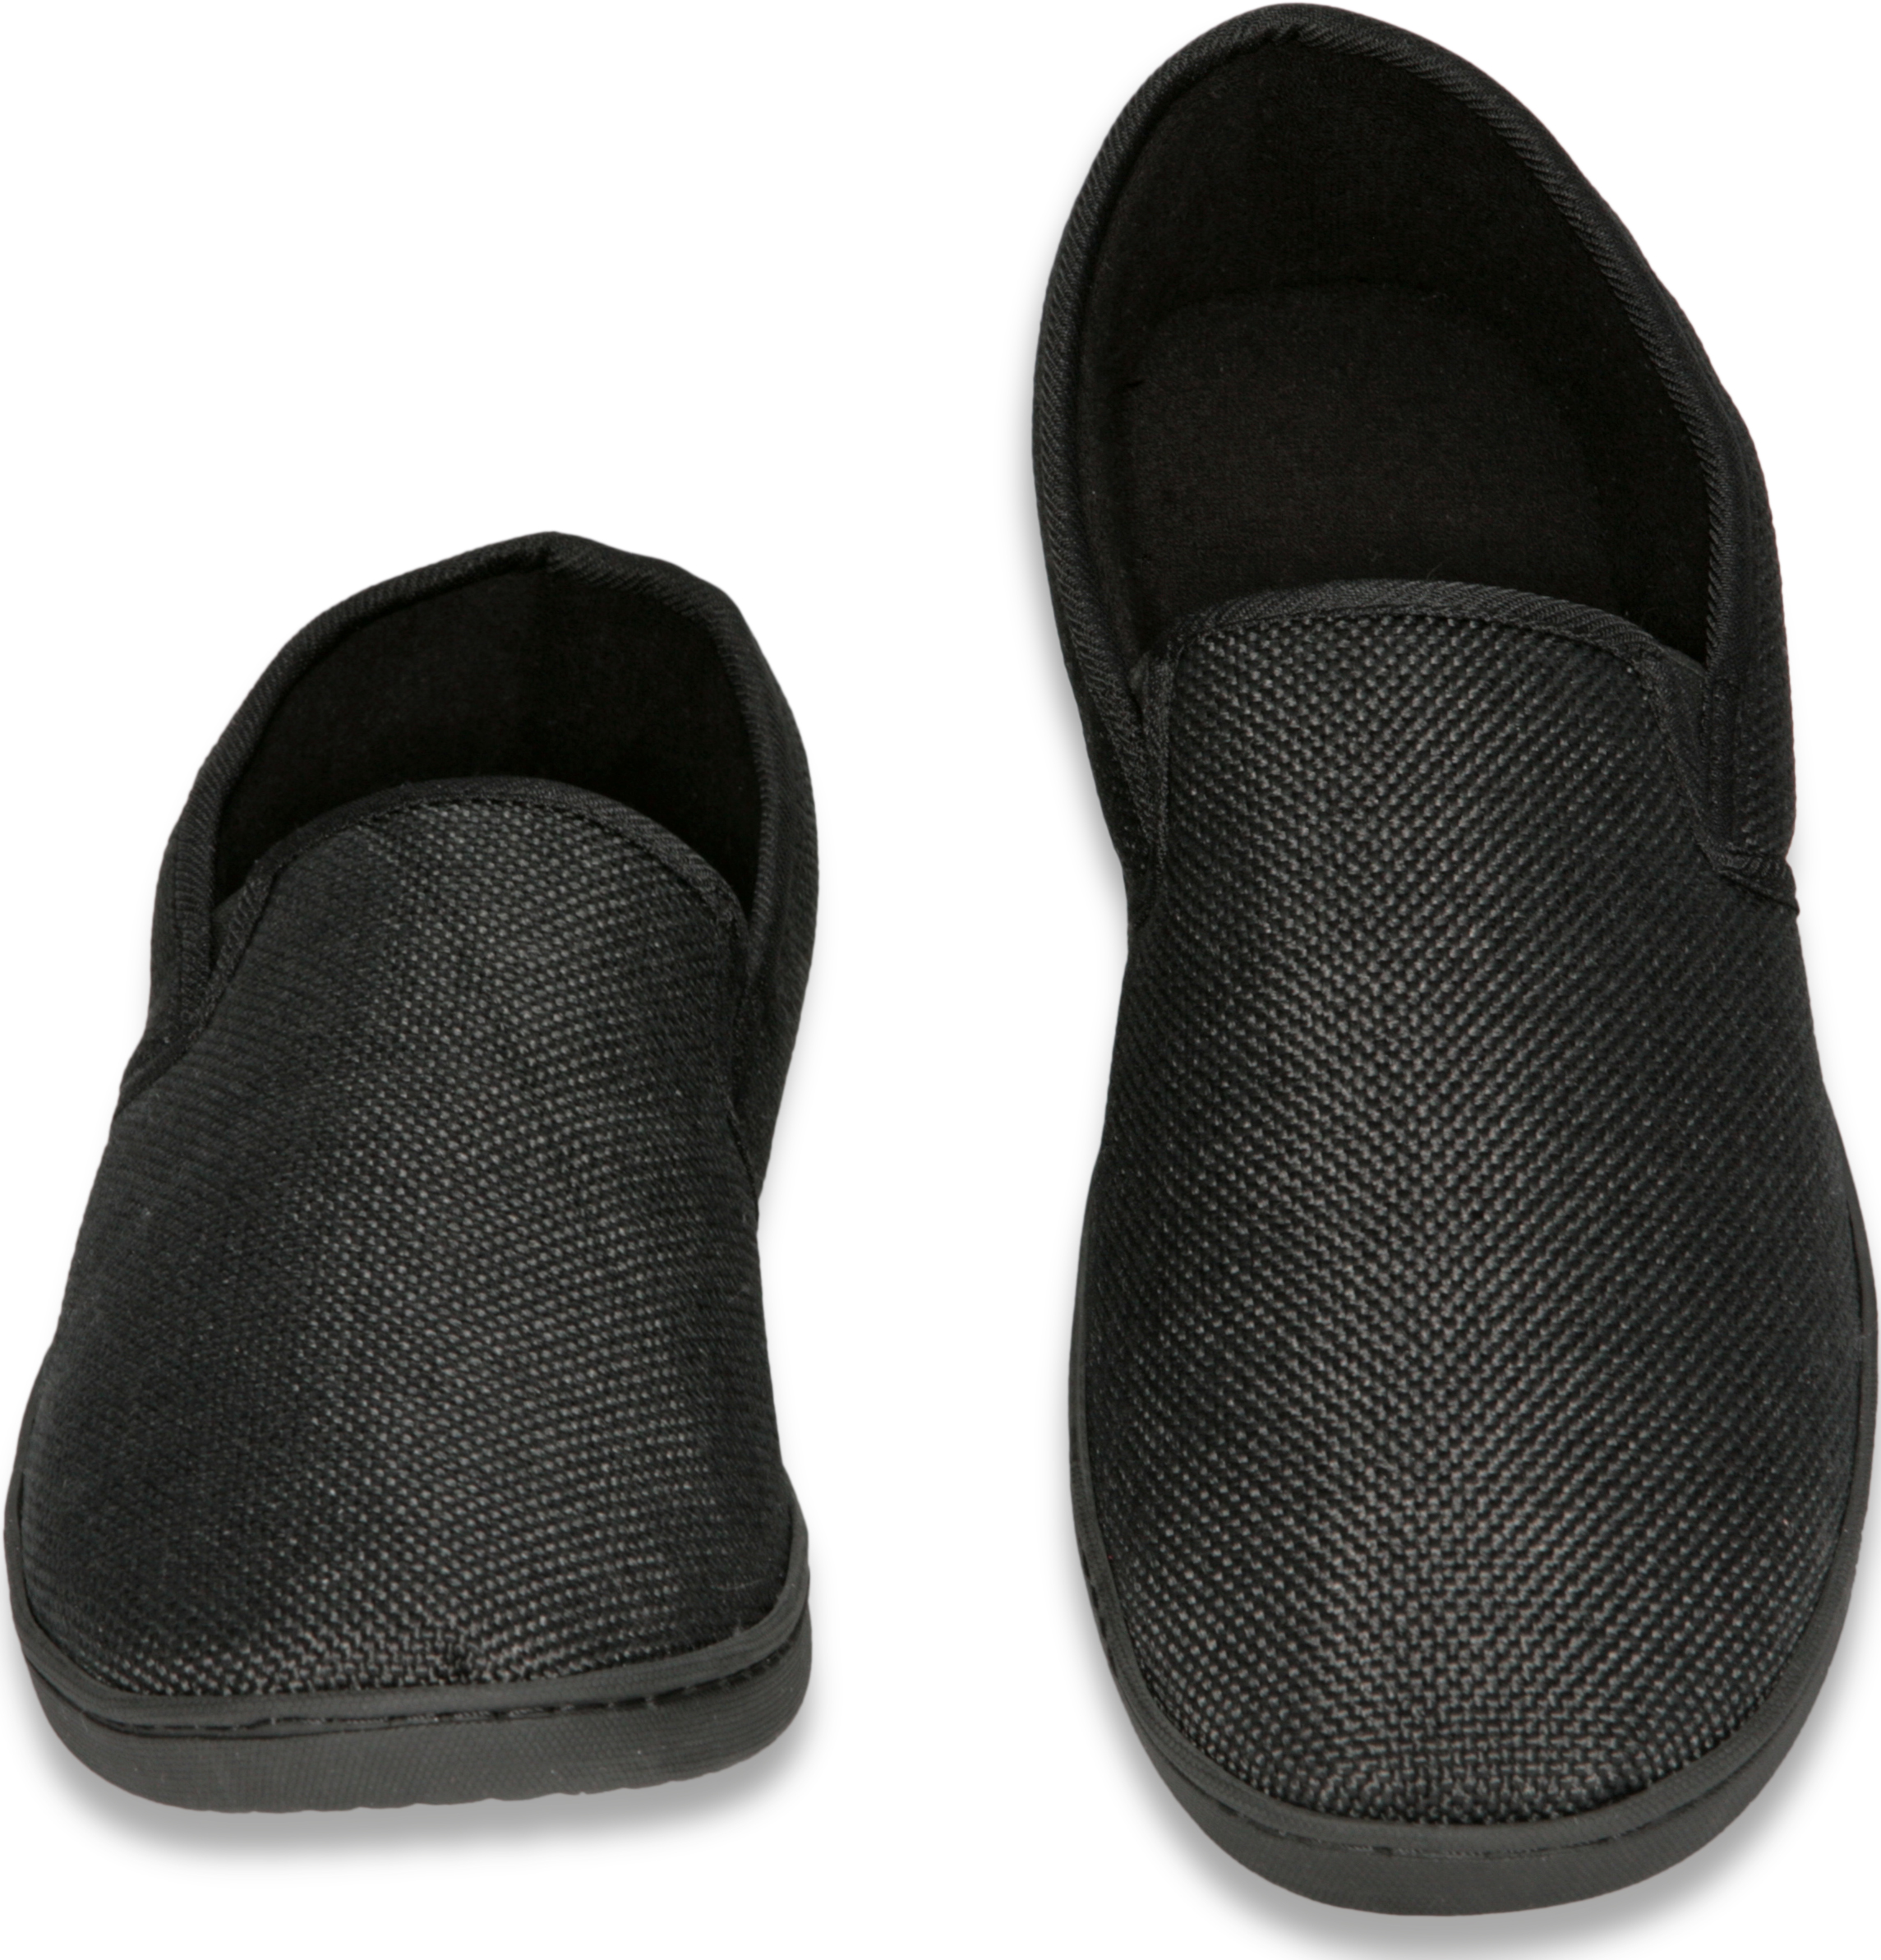 Deluxe Comfort Men's Memory Foam Slipper, Size 11-12 - Suede Vamp Checkered Lining - Memory Foam Insole - Strong TPR Outsole - Mens Slippers, Black - image 3 of 5